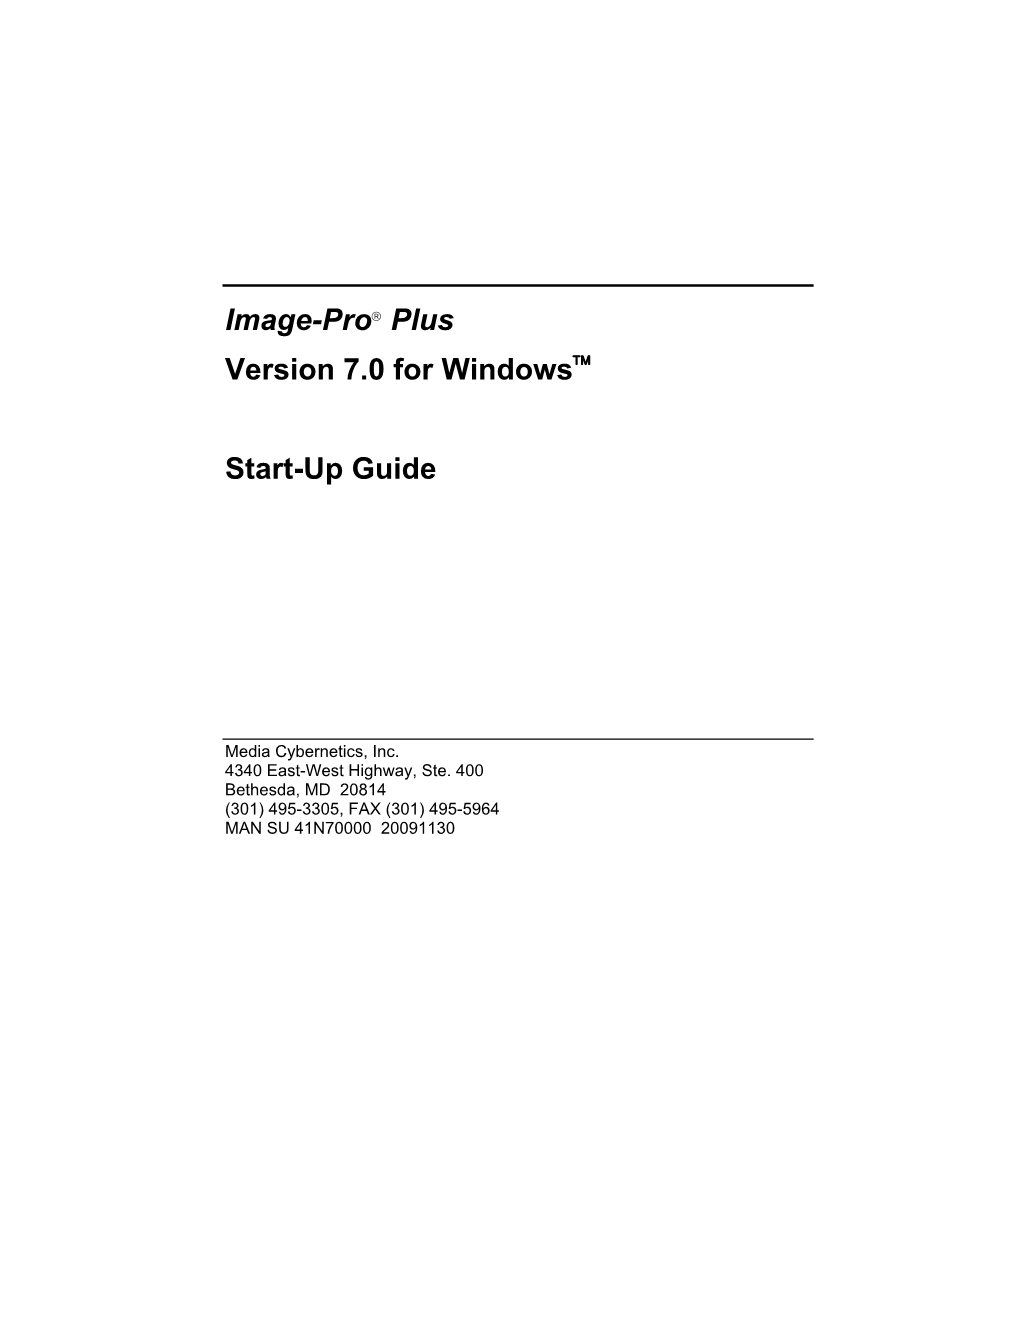 Image-Pro® Plus Version 7.0 for Windows Start-Up Guide